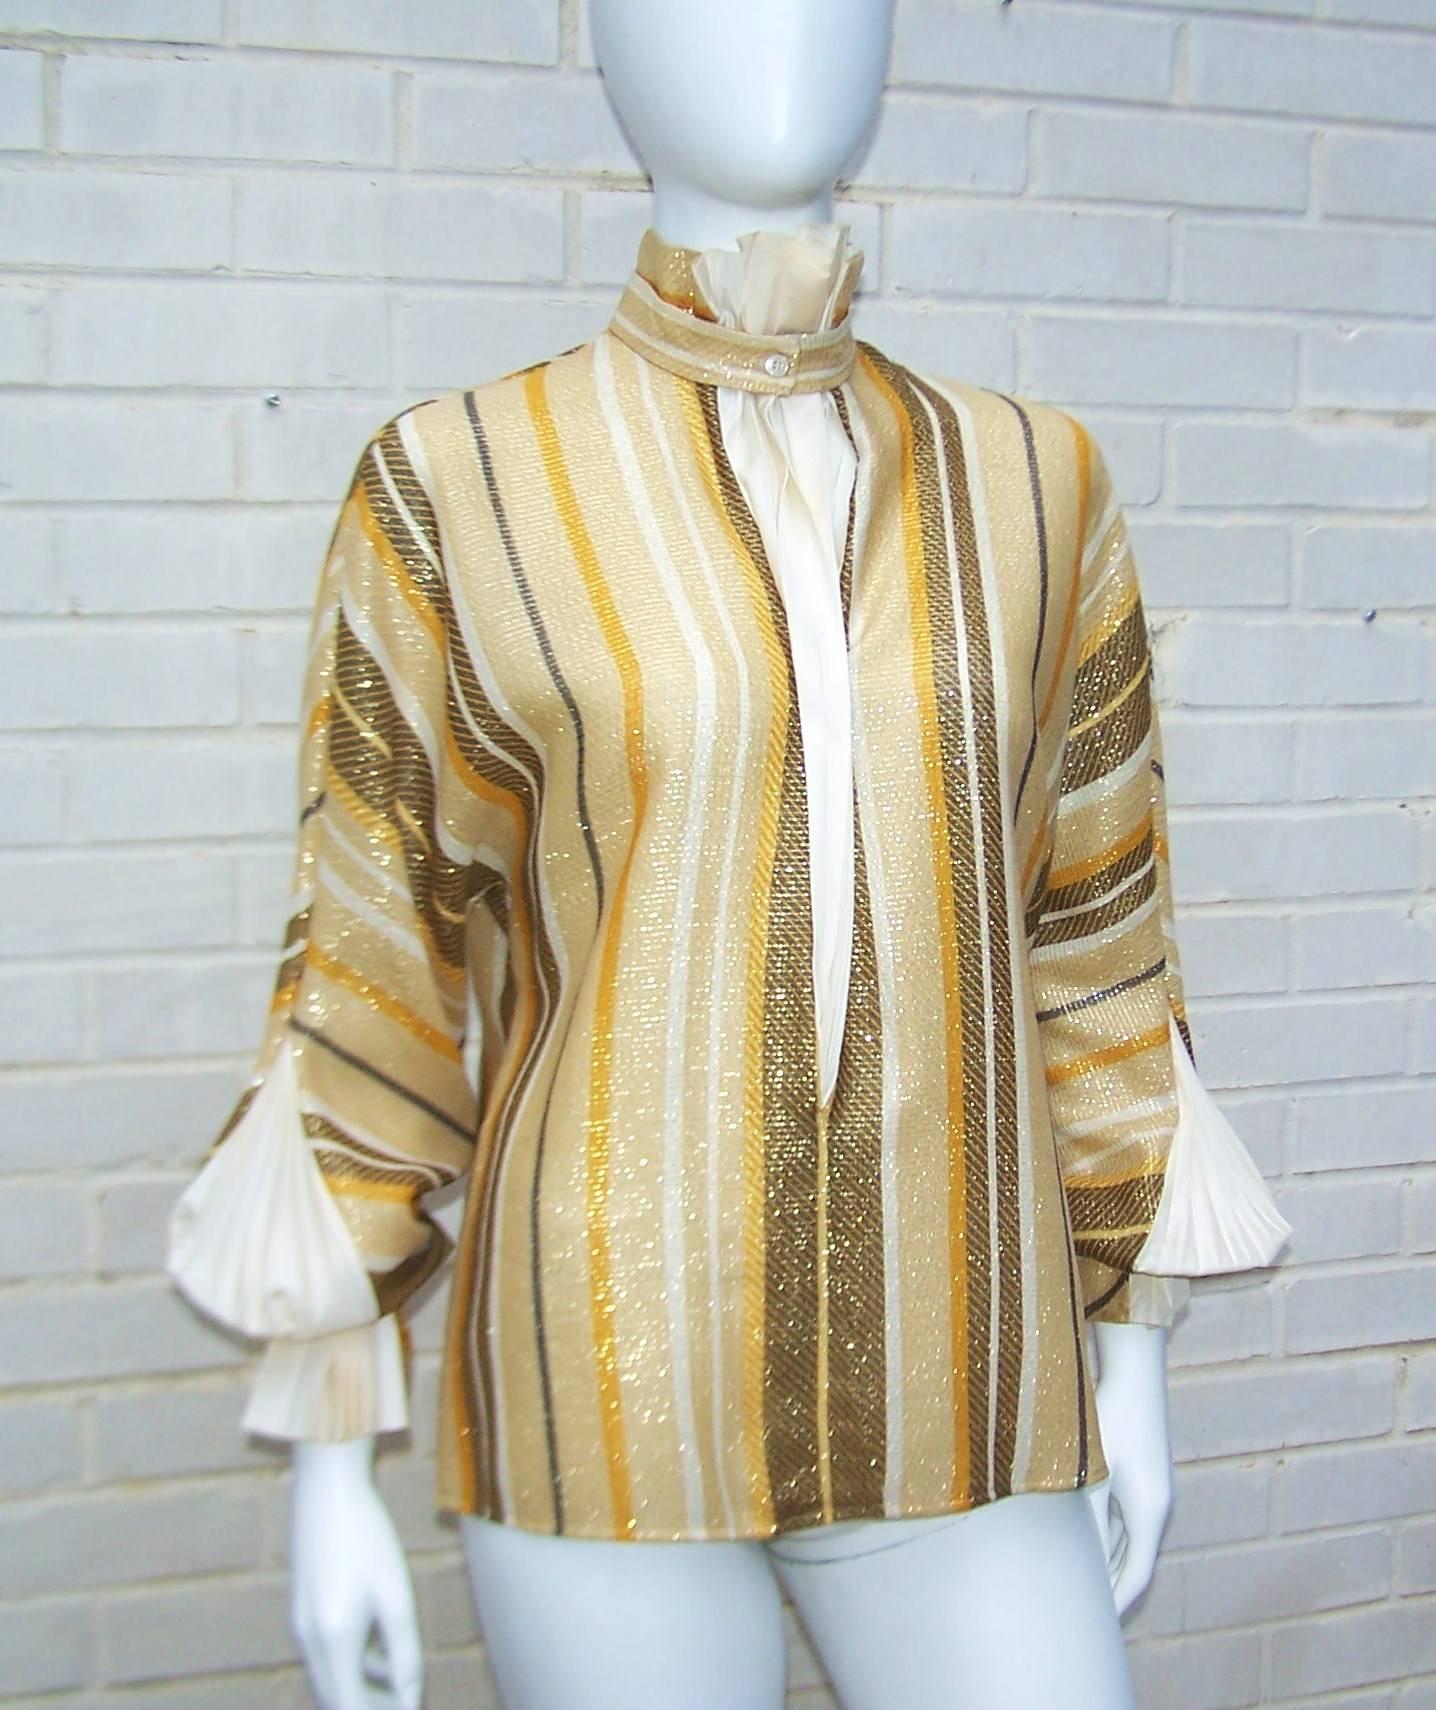 The details on this Gianfranco Ferre blouse from the 1980's are amazing.  The gold lurex fabric is a lightweight wool blend which is the perfect weight for wearing on its own or as part of an ensemble.  The neckline and cuffs are accented with silk